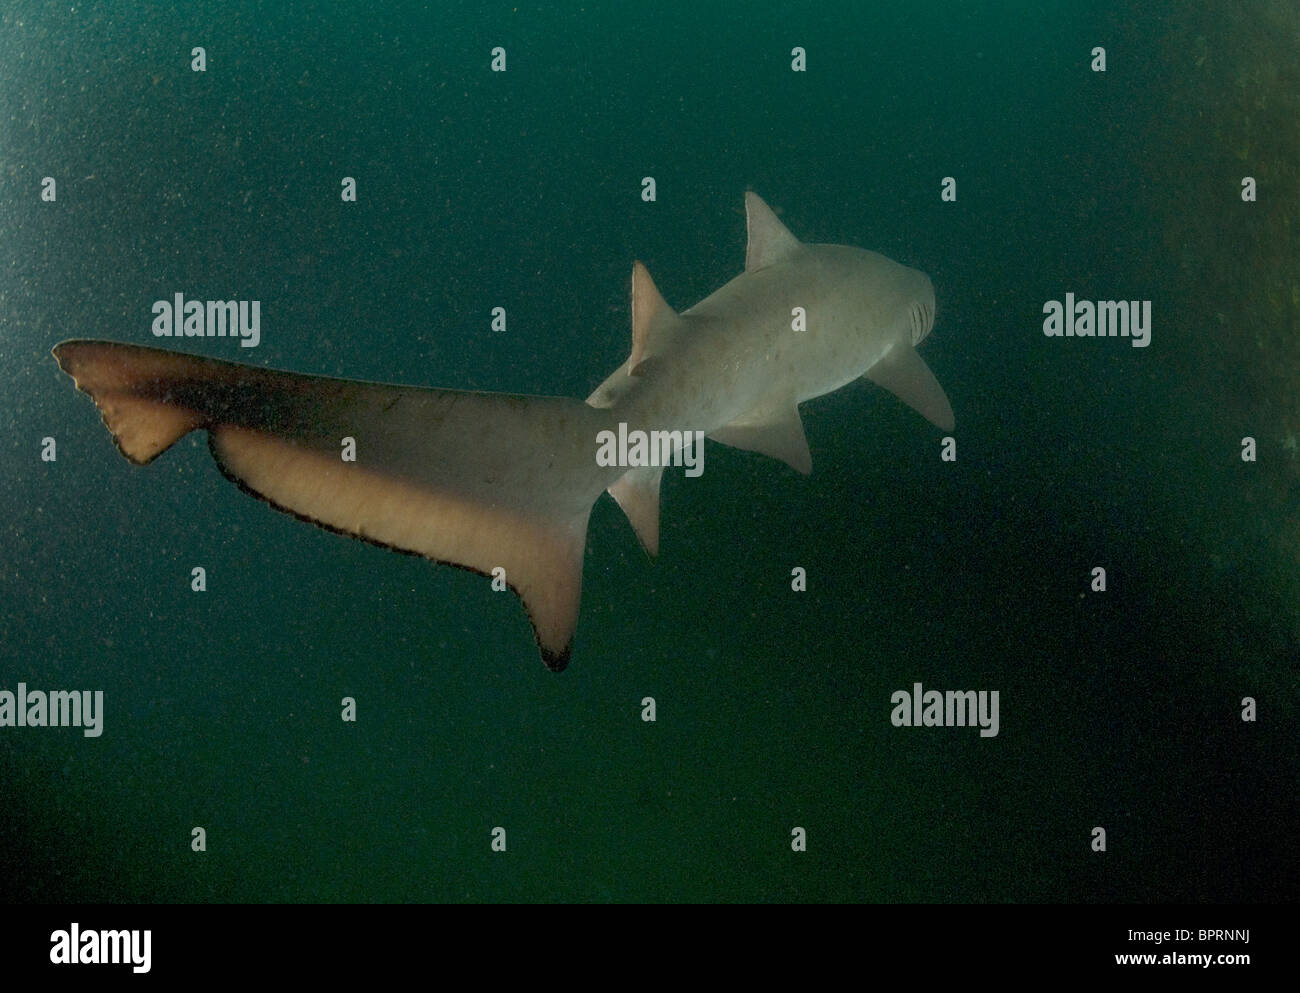 Sand Tiger shark, Odontaspis taurus, on Wreck of the Spar off Morehead City, N.C., Atlanyic Ocean. Stock Photo